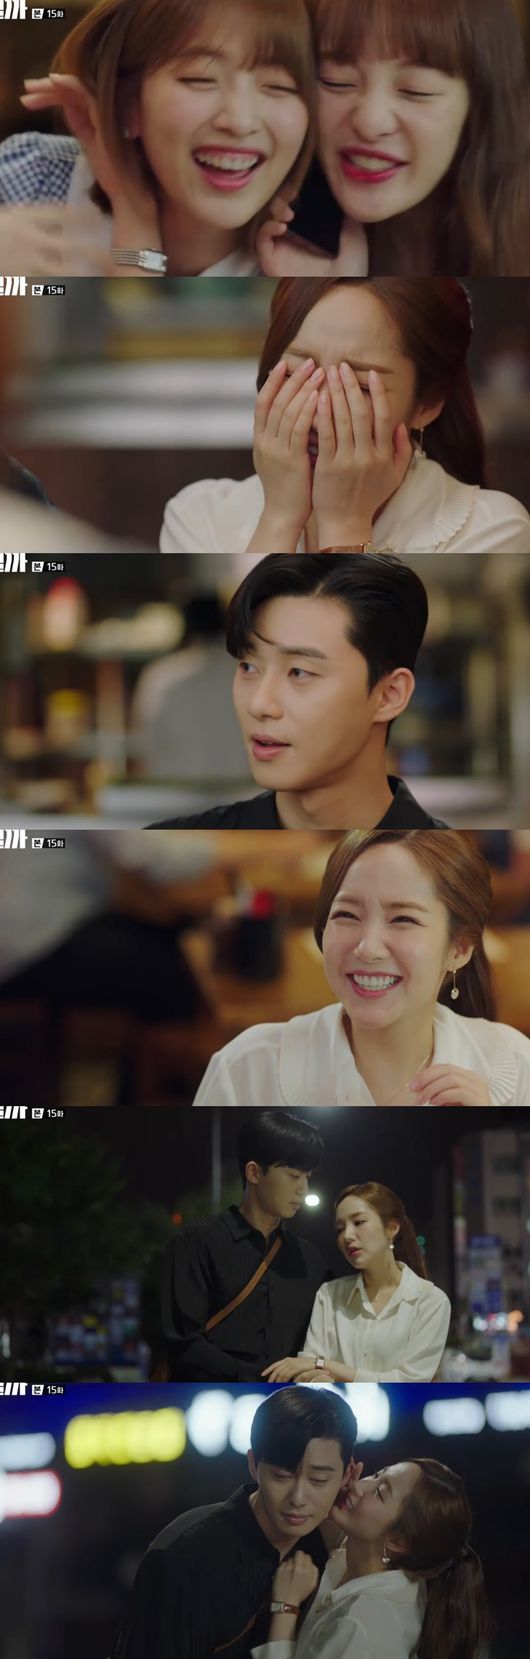 Park Seo-joon presented Park Min-young with a classic yet romantic The Proposal.Lee Yeongjun (Park Seo-joon) made The Proposal to Park Min-young in TVNs Drama Why Secretary Kim Will Do It on the 25th.Young-joon said, Moy Yat, you can go home with Moy Yat, have dinner, and my body is full of MSG. I want to marry Kim Mi-so. Objection.Then, as soon as Young Jun tried to kiss Smile, the father of Smile (Jo Duk-hyun) jumped out of bed and shouted, I have an objection to marrying two people.Kim Mi-sos father called him to the stalls separately. The father of the smile said, Do you really want to marry our smile? Then do the Proposal again.No matter how old the times have changed, romance must be alive. I can not give my daughter to such a cool and unscrupulous person. My father had been drinking a lot of alcohol for Young-joon, who knew all about the fine food tastes of the smile and the financial difficulties.My father of smiles told Young Jun, Pass! I appoint you as my son-in-law, but I have to do The Proposal properly.I liked it when I met you again nine years ago, you didnt recognize me, but I liked it, I think it was since then, I loved you.Ill make you happy for the rest of your life. Ill be happy for the rest of my life because of you, Confessions said.Lee Yeongjun asked Park Yoo-sik (Kang Ki-young) for advice on what to do with The Proposal.However, there was nothing more to do with Young Jun from the trivial to the scaled The Proposal.After agonizing, Young-joon decided to do The Proposal at Las Vegas, where Young-joon asked Smile to take a vacation to Las Vegas.But Smile said, There are many eyes that I have seen since the vice president and I became known. There should be no disruption.Smile was drunk at a dinner with Bongsera (Hwang Bo-ra) Kim Ji-ah (Pyo Ye-jin); Young-joon appeared and Sarah and Jia said, I will call you smiley boyfriend.Even with the embarrassing question, Young Jun had only intended to do The Proposal.On the way home, a drunken smile told Young Jun, I was very impressed when I called Lullaby last time.The next day, she was embarrassed by Young-joon, and she was not sure what to do. She said she was sick and handed her a book.Young-joons parents found out that Smile and Young-joon are in a relationship. Young-joon told her mother Choi I-ga (Kim Hye-ok) that she wanted to marry Smile.But Choi said, I am a little worried now. I think Sung Yeon liked the smile, but you and Sung Yeon have been living together for a while and now they have only reconciled.But I am afraid that my mother will be away from it again. At this time, Lee Sung-yeon (Lee Tae-hwan) appeared and said, It was okay because of the affection that I was there in the past.But it was not me who was next to the smile at that time, but Young Jun. So Young Jun is the person. Sung Yeon advised Young Jun that he should not follow and show off what others do about The Proposal.Concentrate on the smile, what smiles like, and what you want to do most to smiles. When you worry, you get the answer.After that, Young-joon called Smile and asked her to come home. Young-joon prepared his own The Proposal. He wrote in a sketchbook and played the piano and sang.A smile shed tears of emotion.Young-joon said, I was impressed when I called Lullaby. Im going to sing for the rest of my life. Moy Yat night, sleep with me.Im very polite and romantic, he said, kneeling down and handing him the ring. Will you marry me?The smile accepted Young Juns sincerity. Young Jun smiled, saying, You hear the answer to the fifth proposal.TVN Why is Secretary Kim doing that screen capture